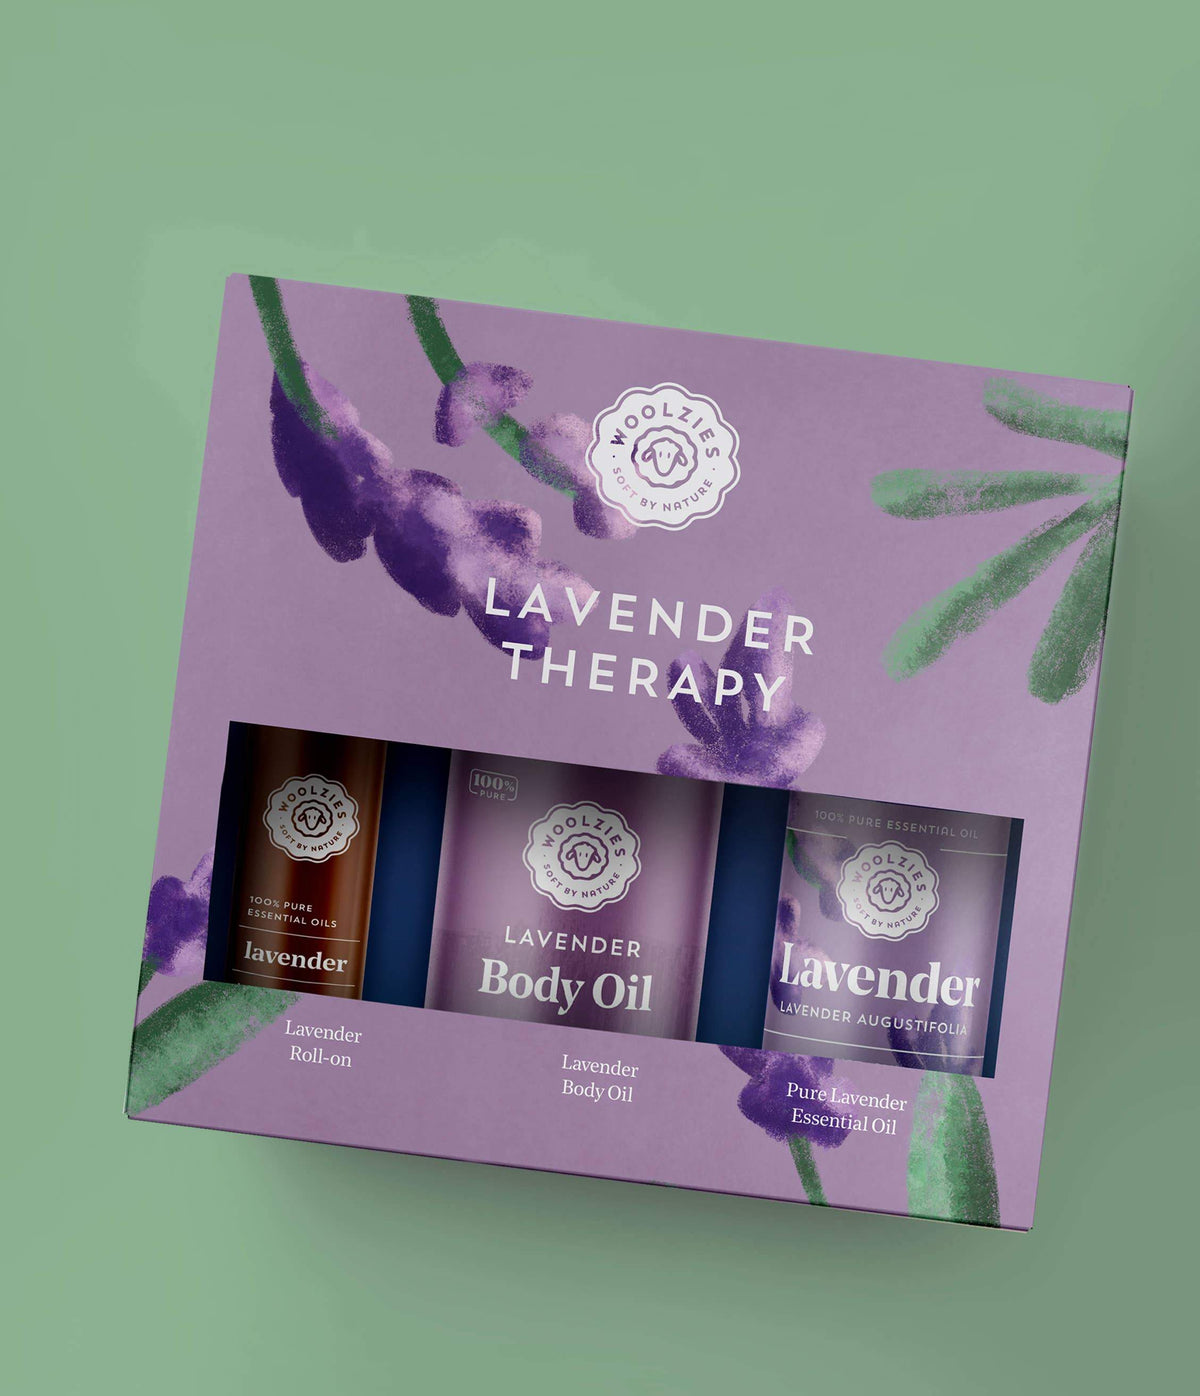 Woolzies Lavender Therapy Kit